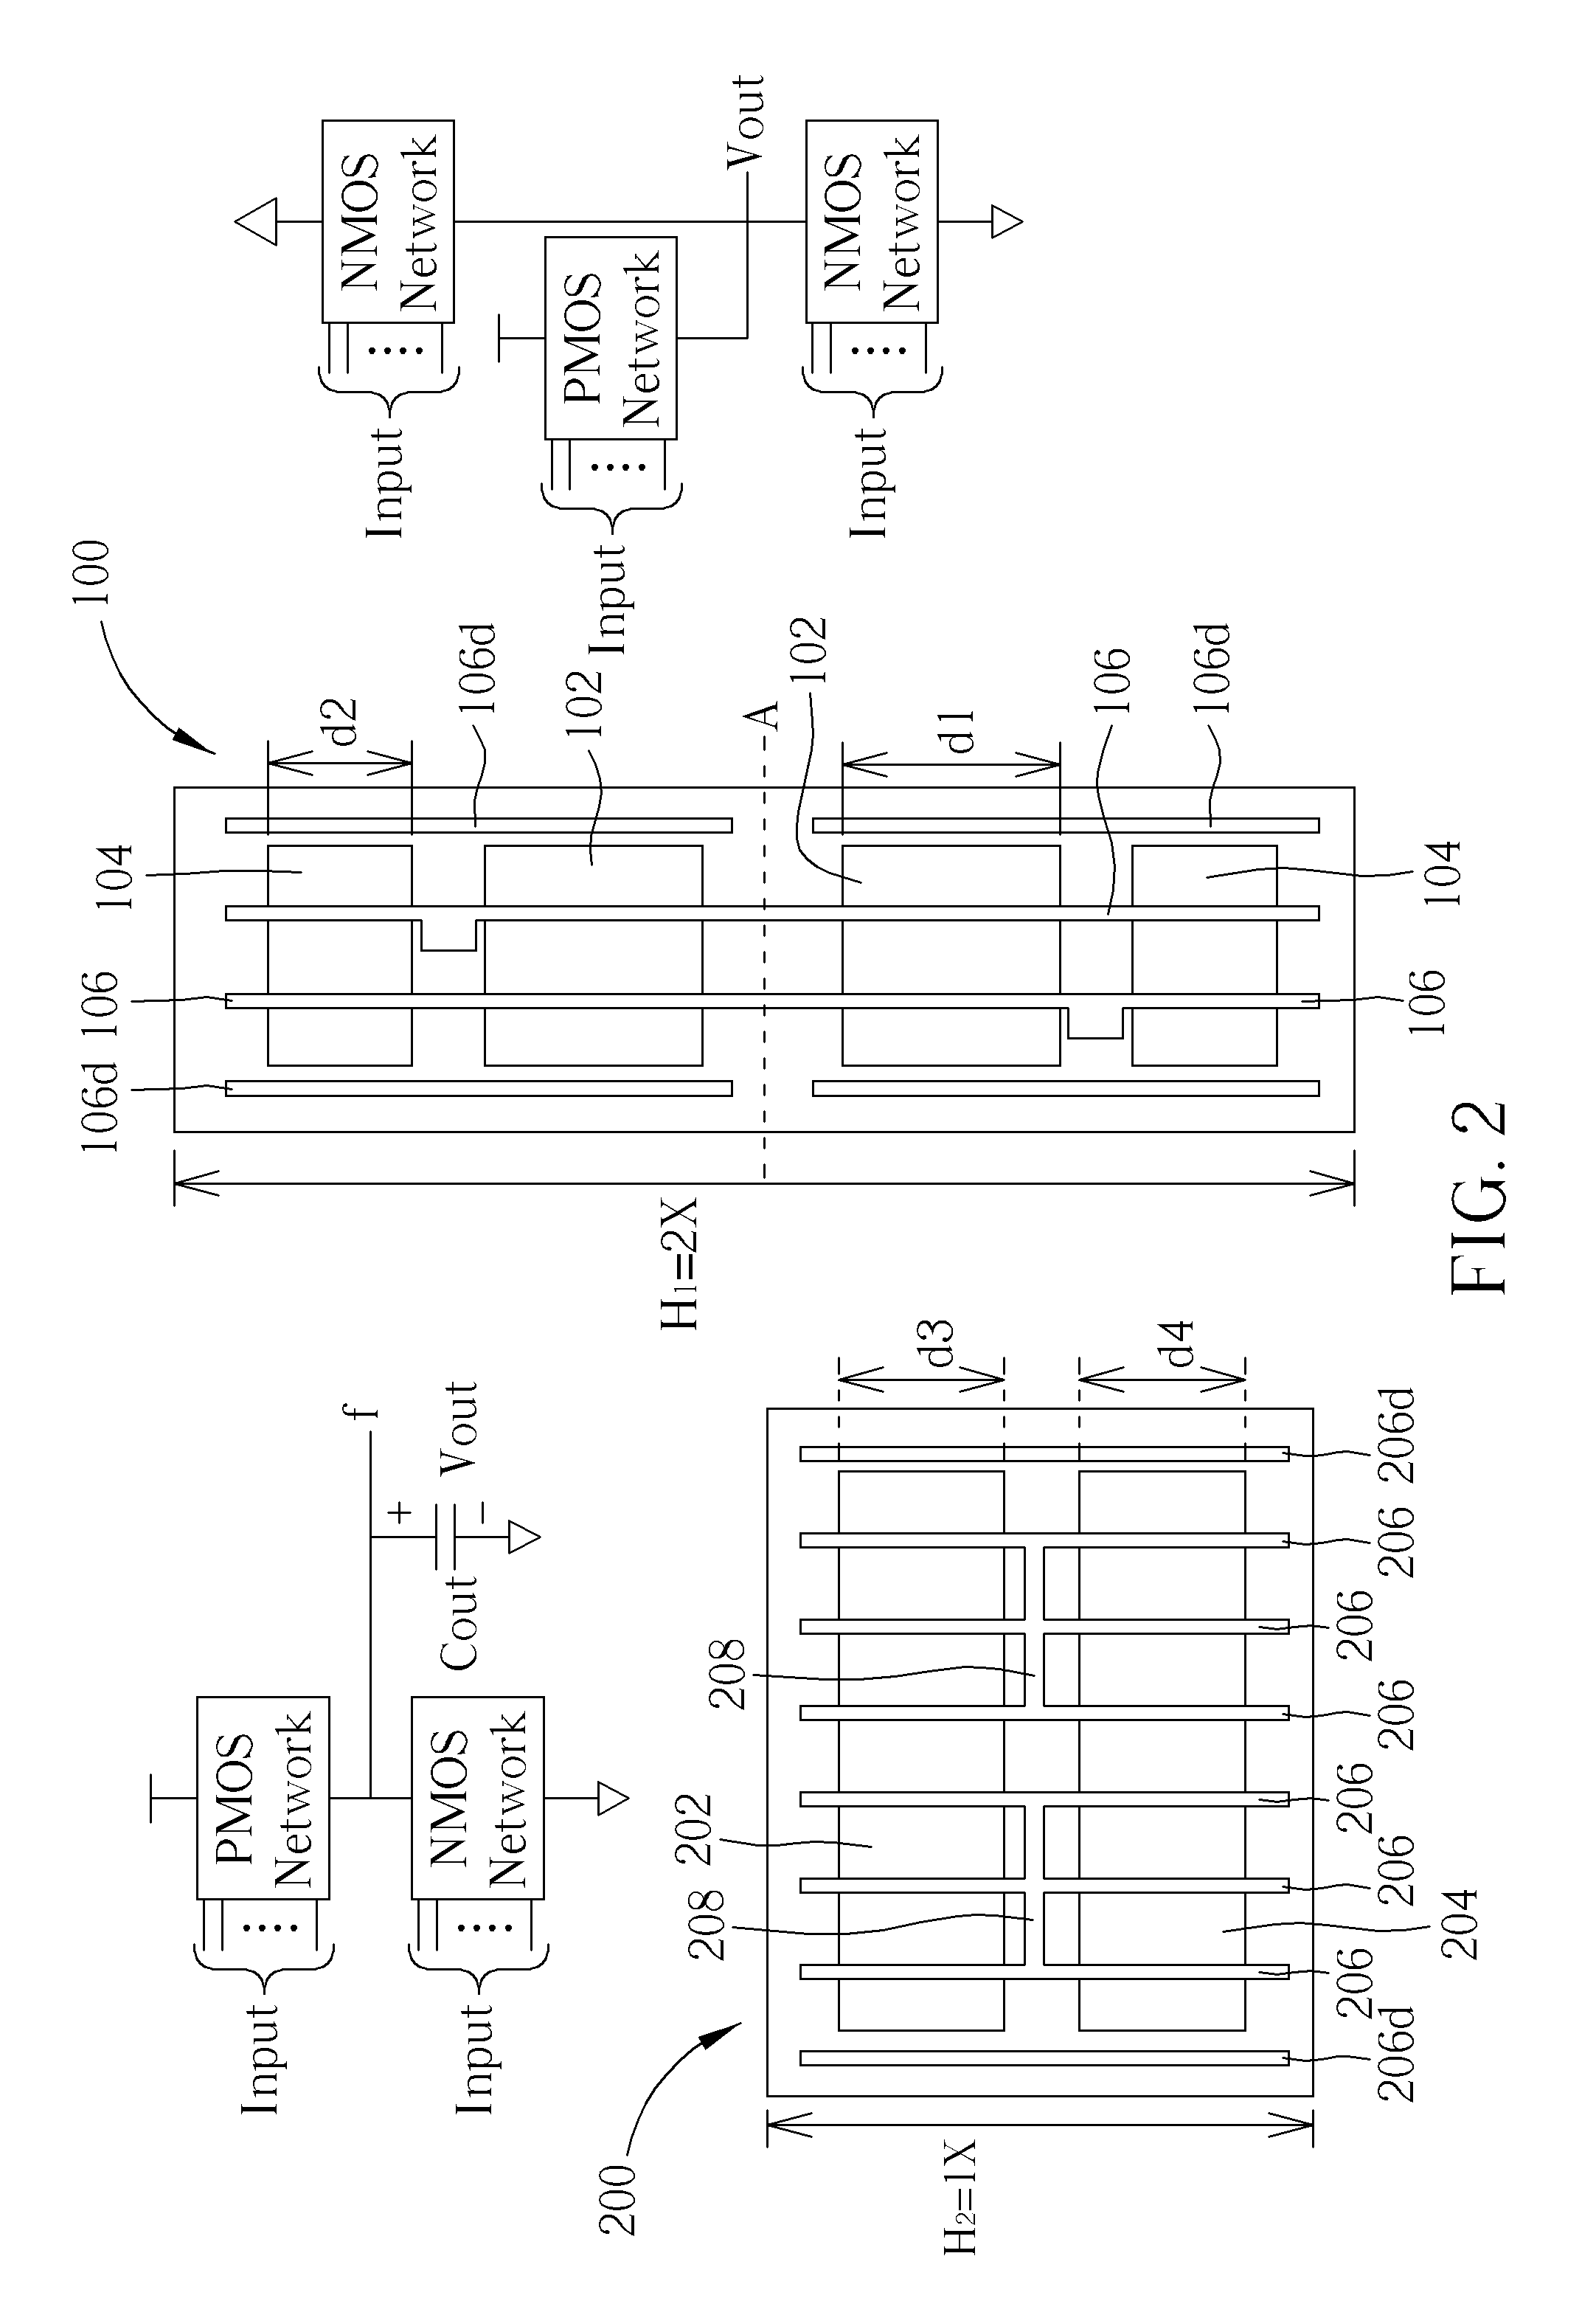 Integrated circuit layout structure